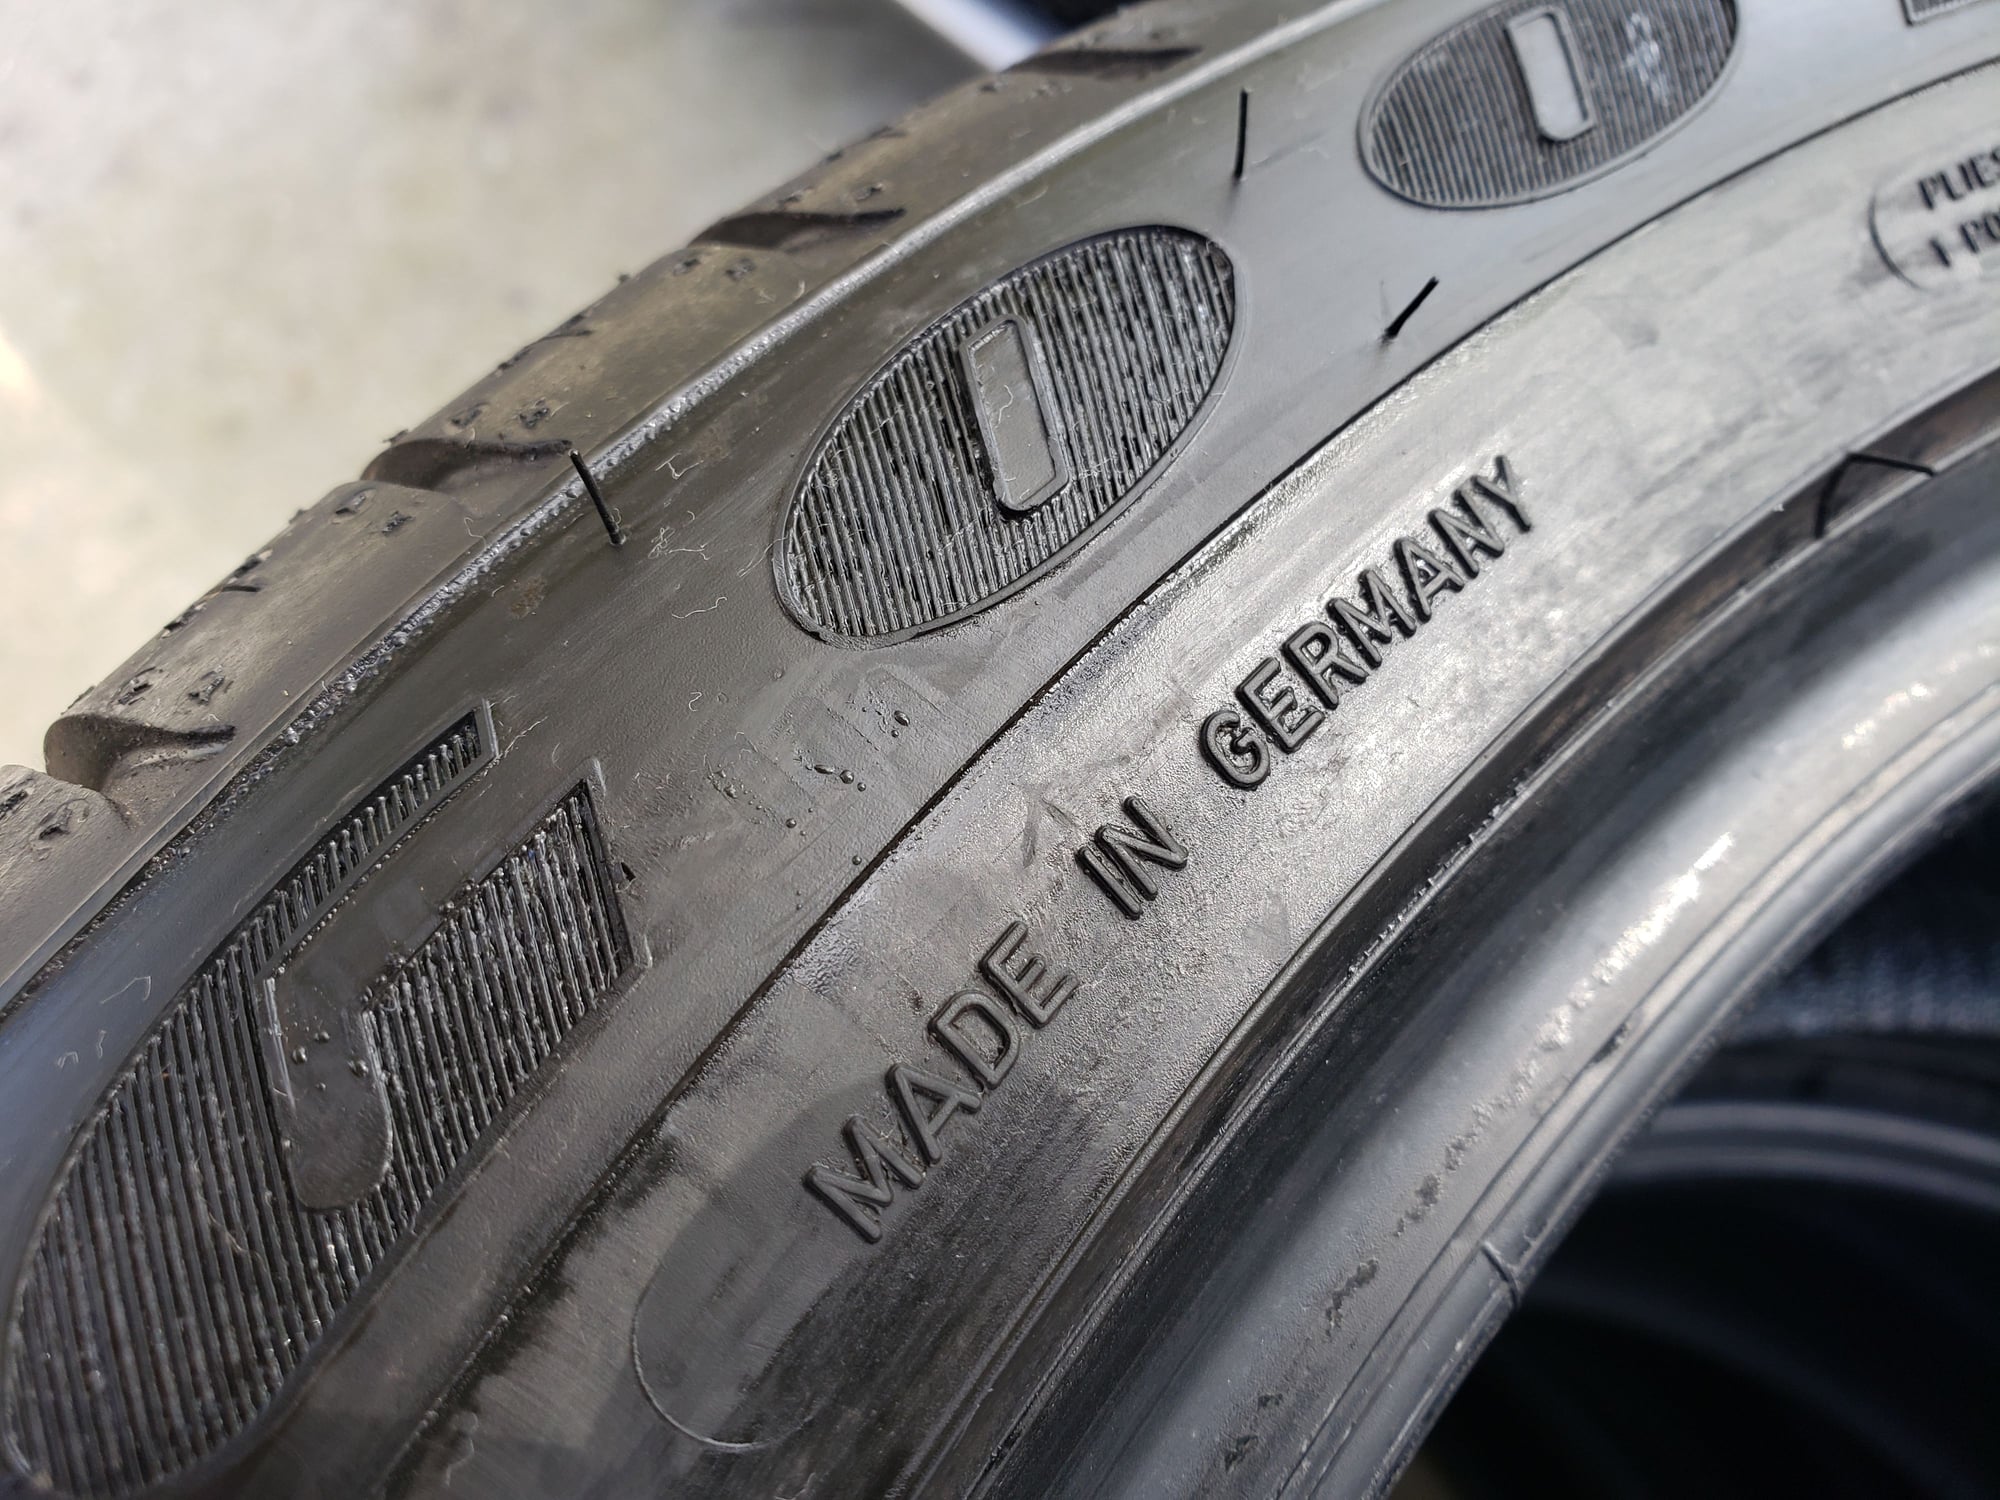 Wheels and Tires/Axles - NEW GOODYEAR EAGLE SPORT RUN FLAT TIRES (set of 4) $849 - New - 2017 to 2019 Mercedes-Benz E300 - Tampa, FL 33612, United States